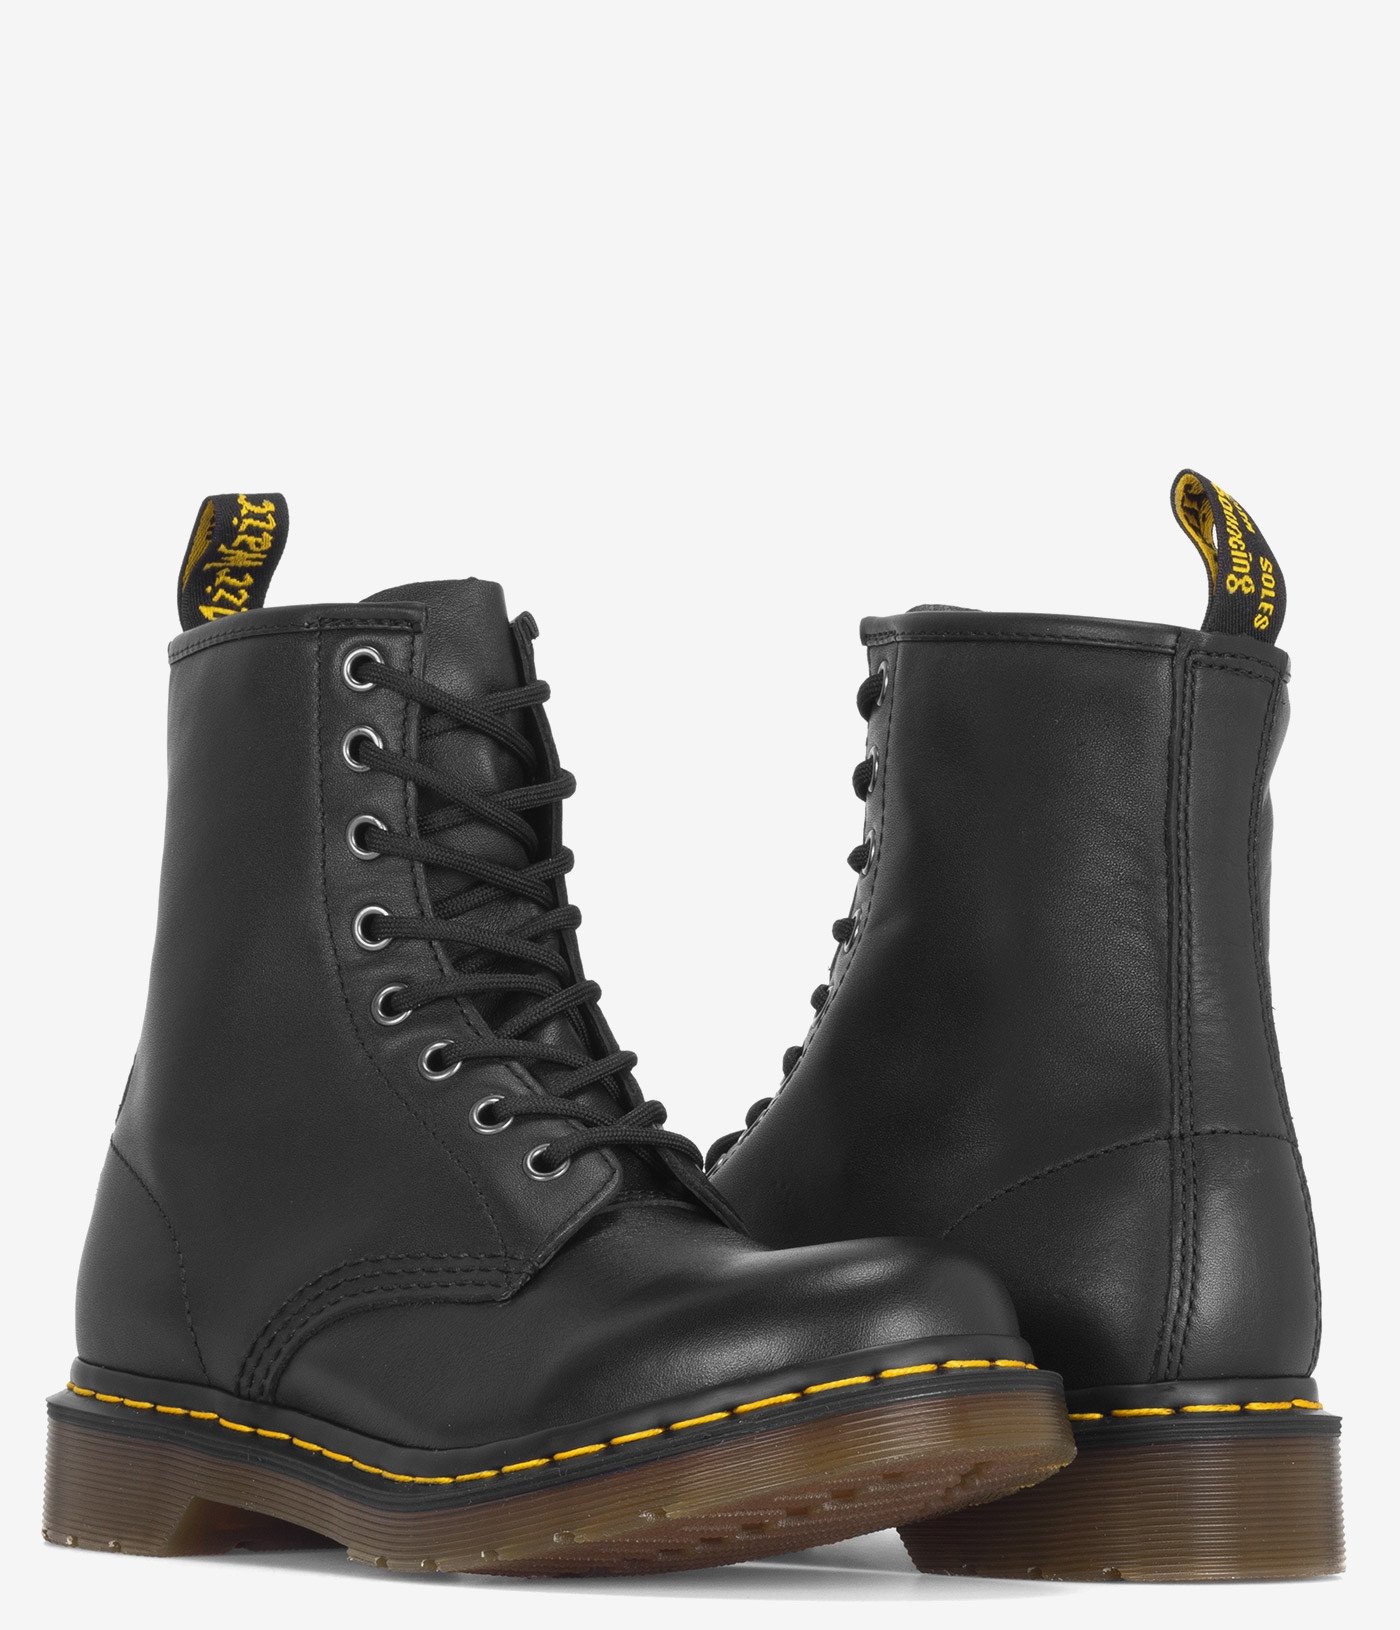 Dr. Martens 1460 Nappa Leather Lace Up Boot